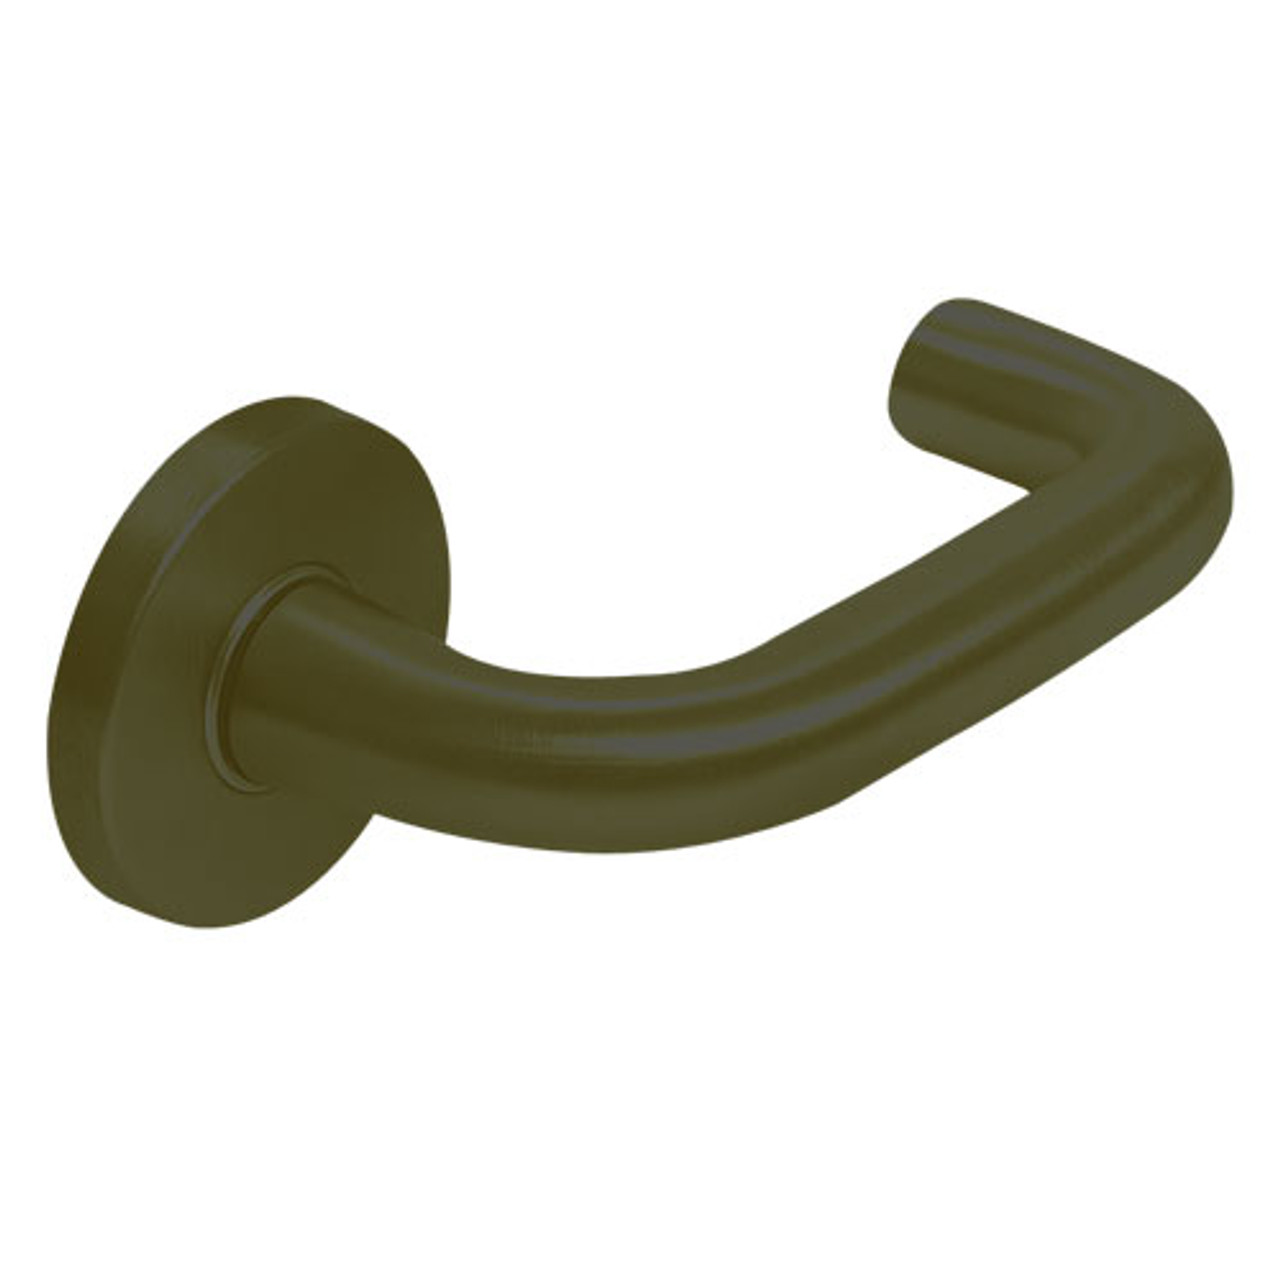 ML2059-LWA-613-M31 Corbin Russwin ML2000 Series Mortise Security Storeroom Trim Pack with Lustra Lever in Oil Rubbed Bronze